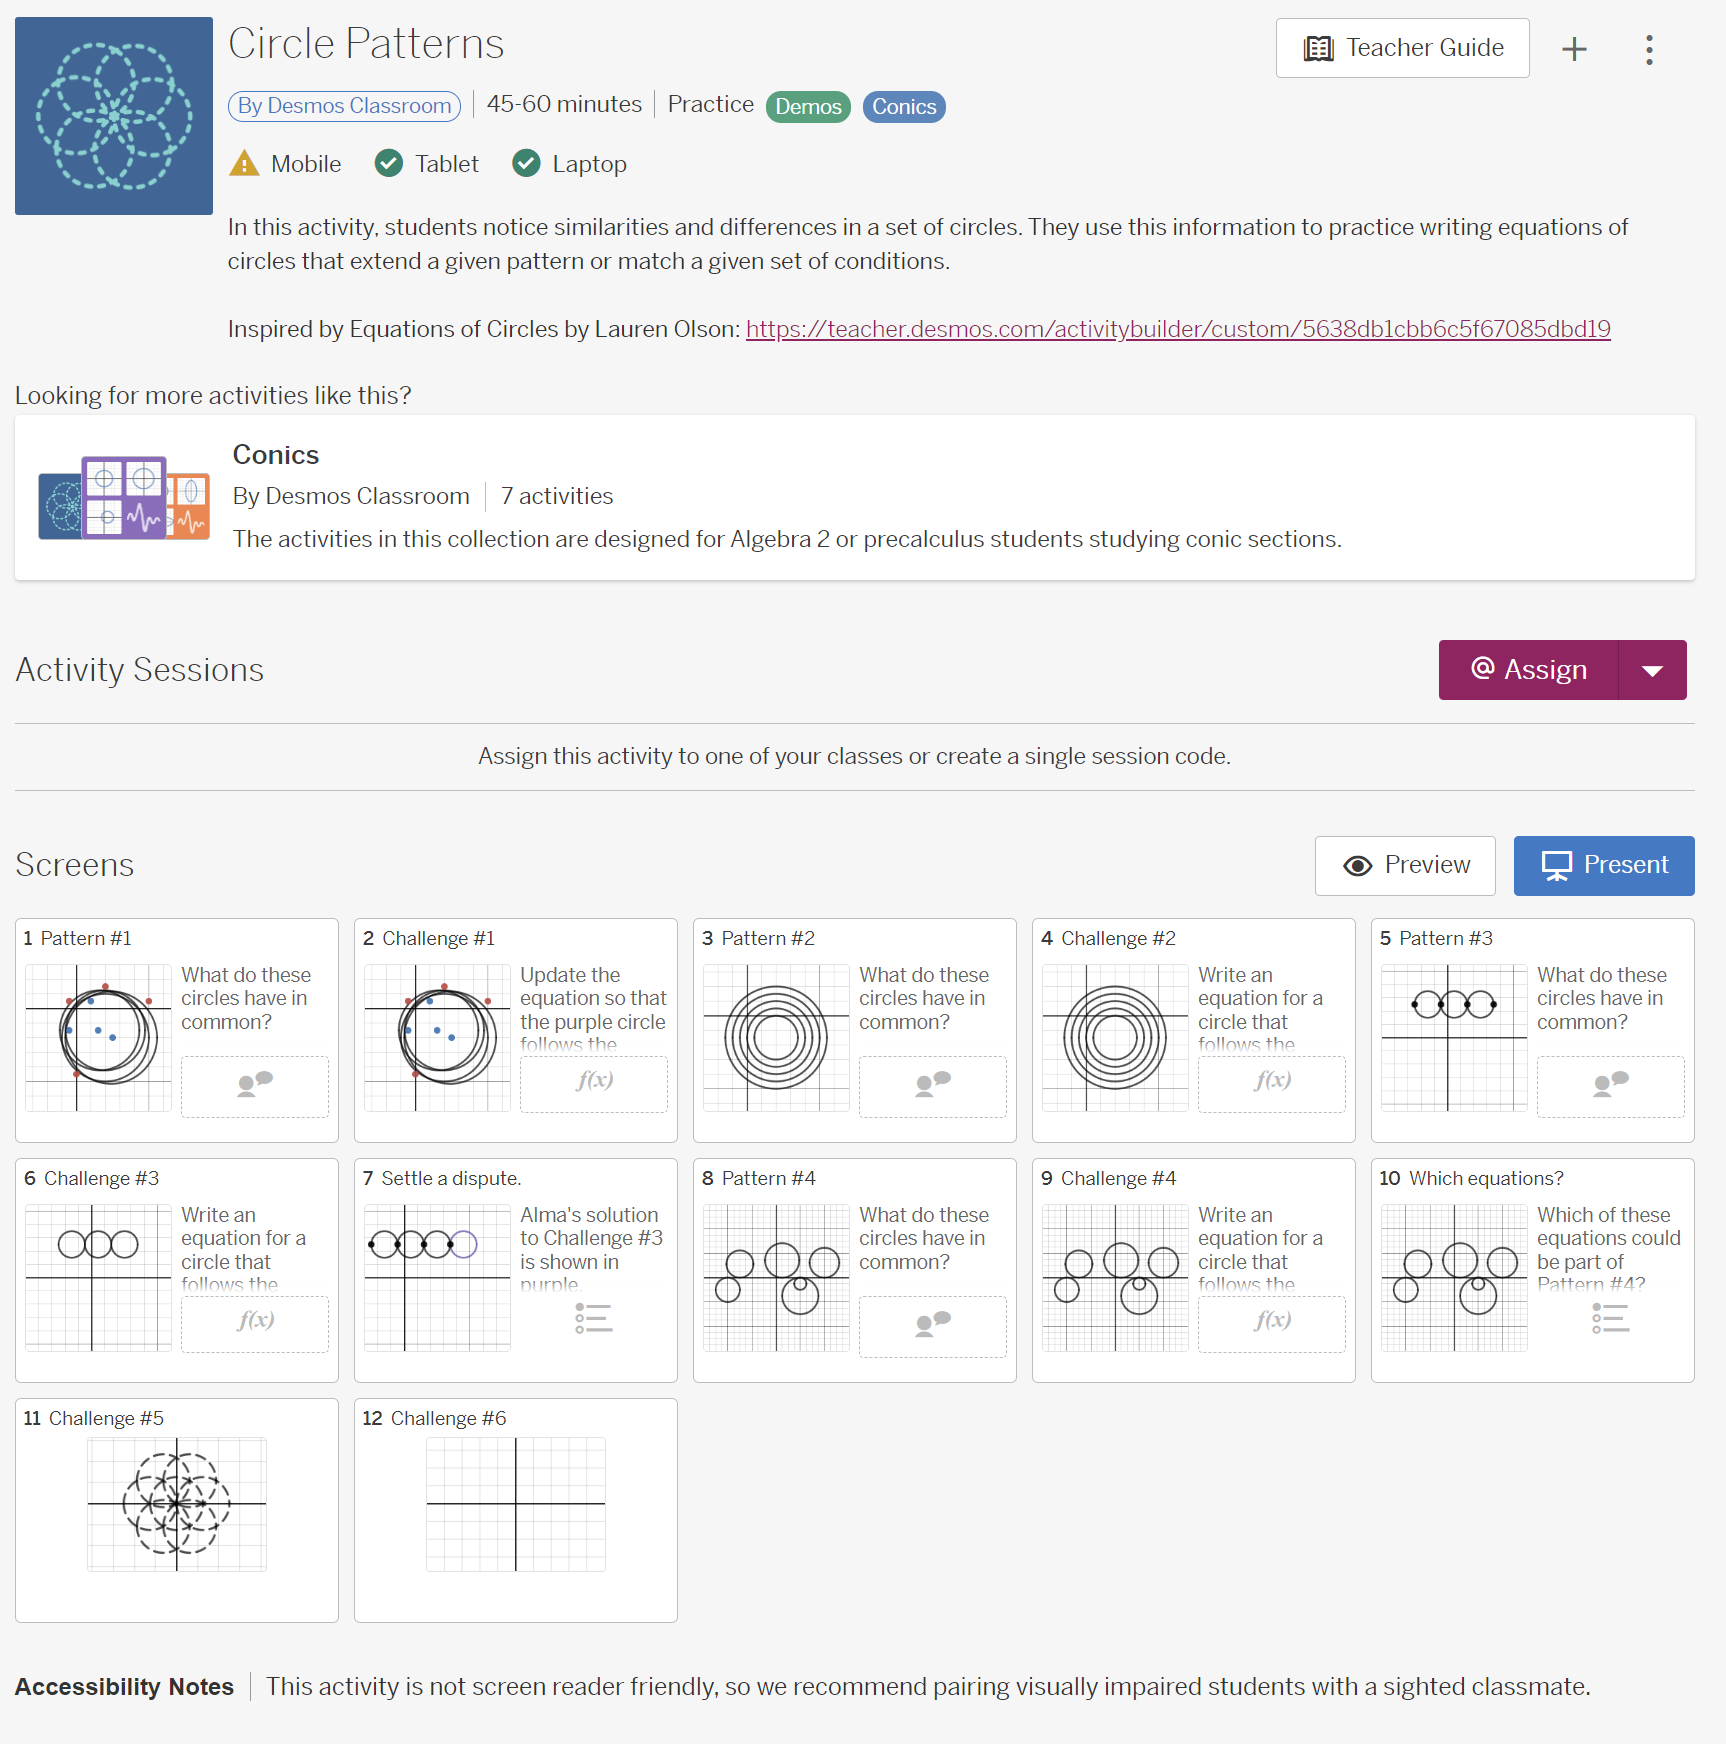 screenshot of desmos classroom instructor interface for a specific lesson that includes a dozen specific challenges 